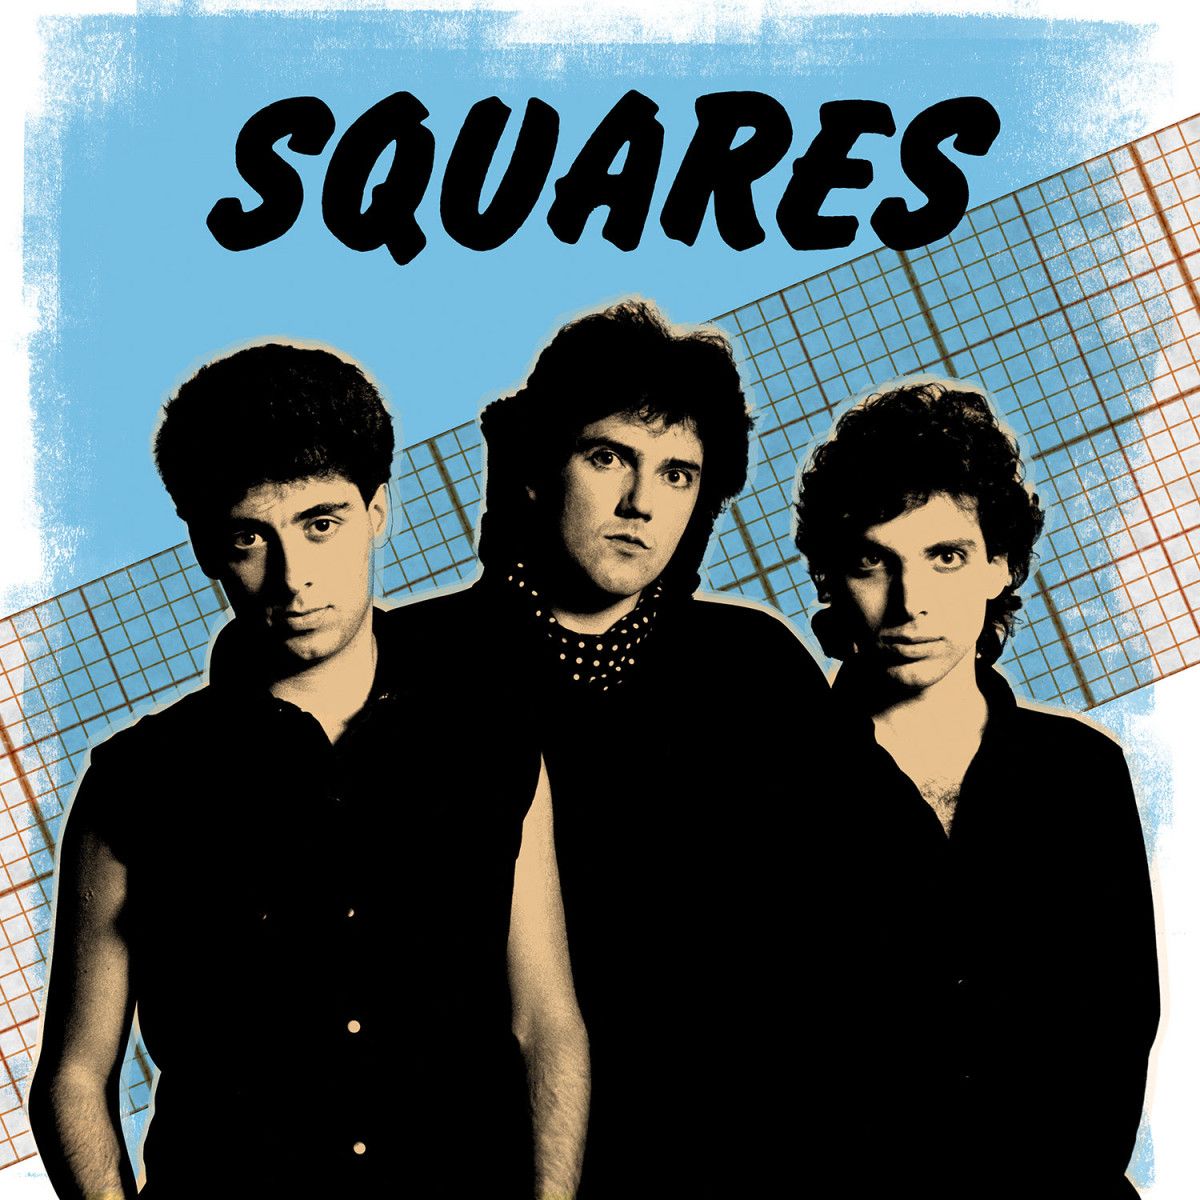 The-Squares-Compilation "Best Of The Early '80s Demos" erscheint im April